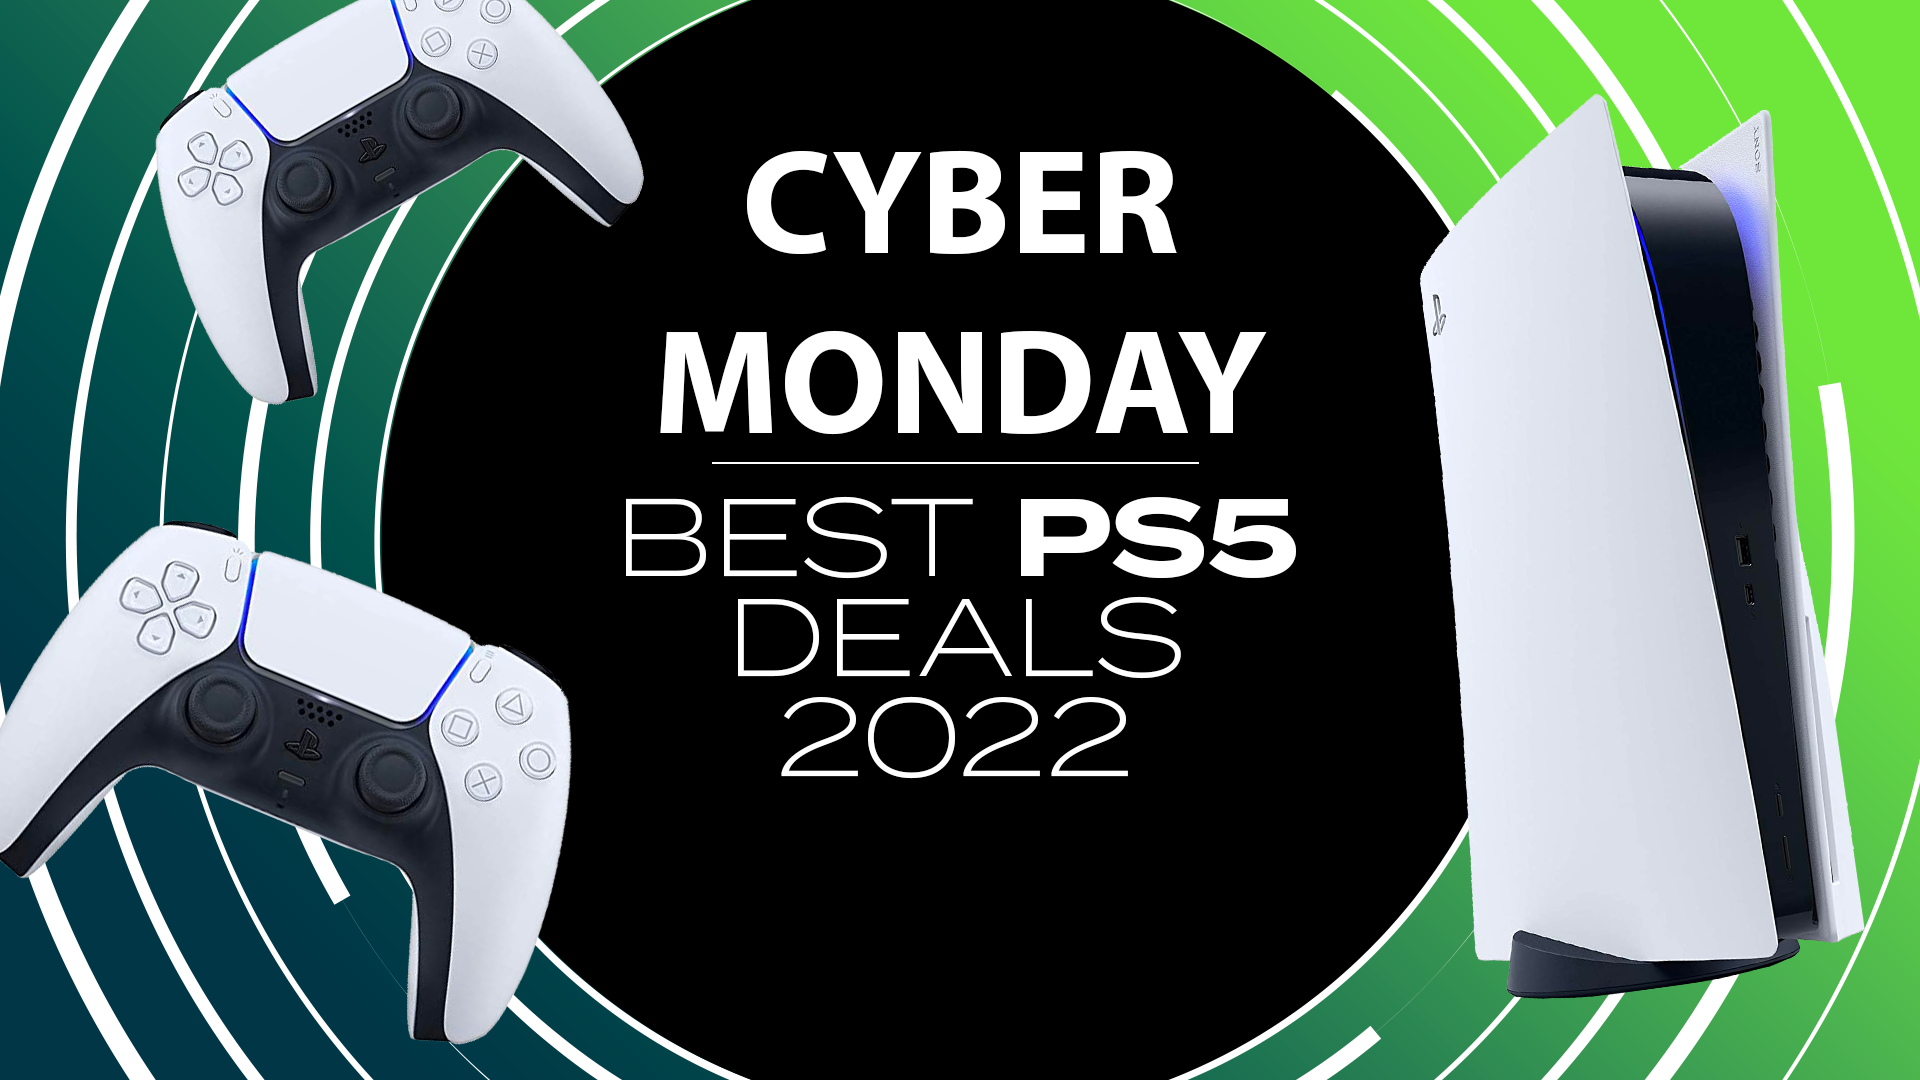 Image for Cyber Monday PS5 deals 2022: best offers and discounts